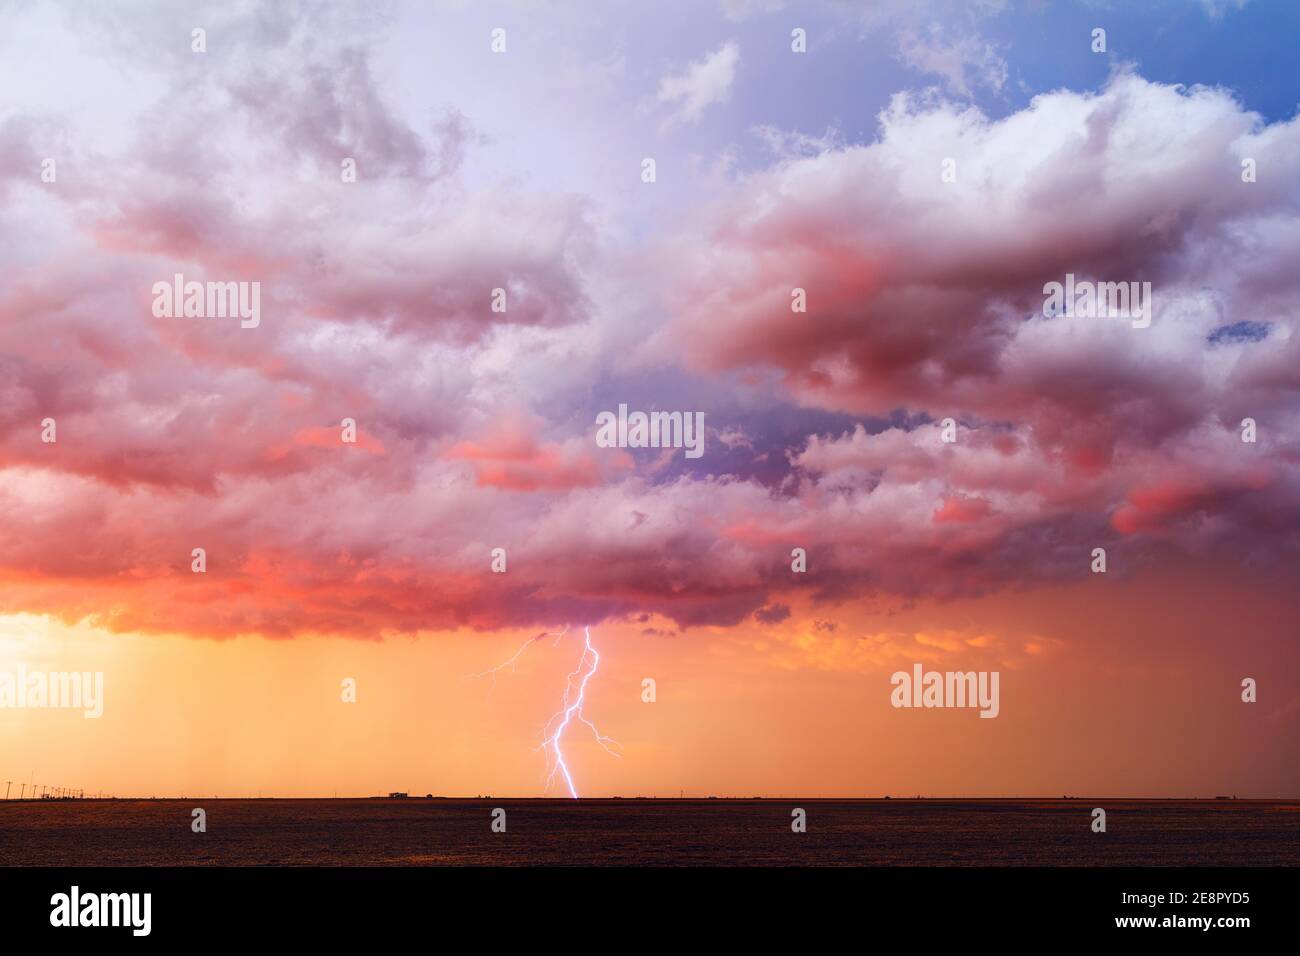 Stormy sunset sky with dramatic clouds and lightning strike as a thunderstorm approaches Perryton, Texas Stock Photo